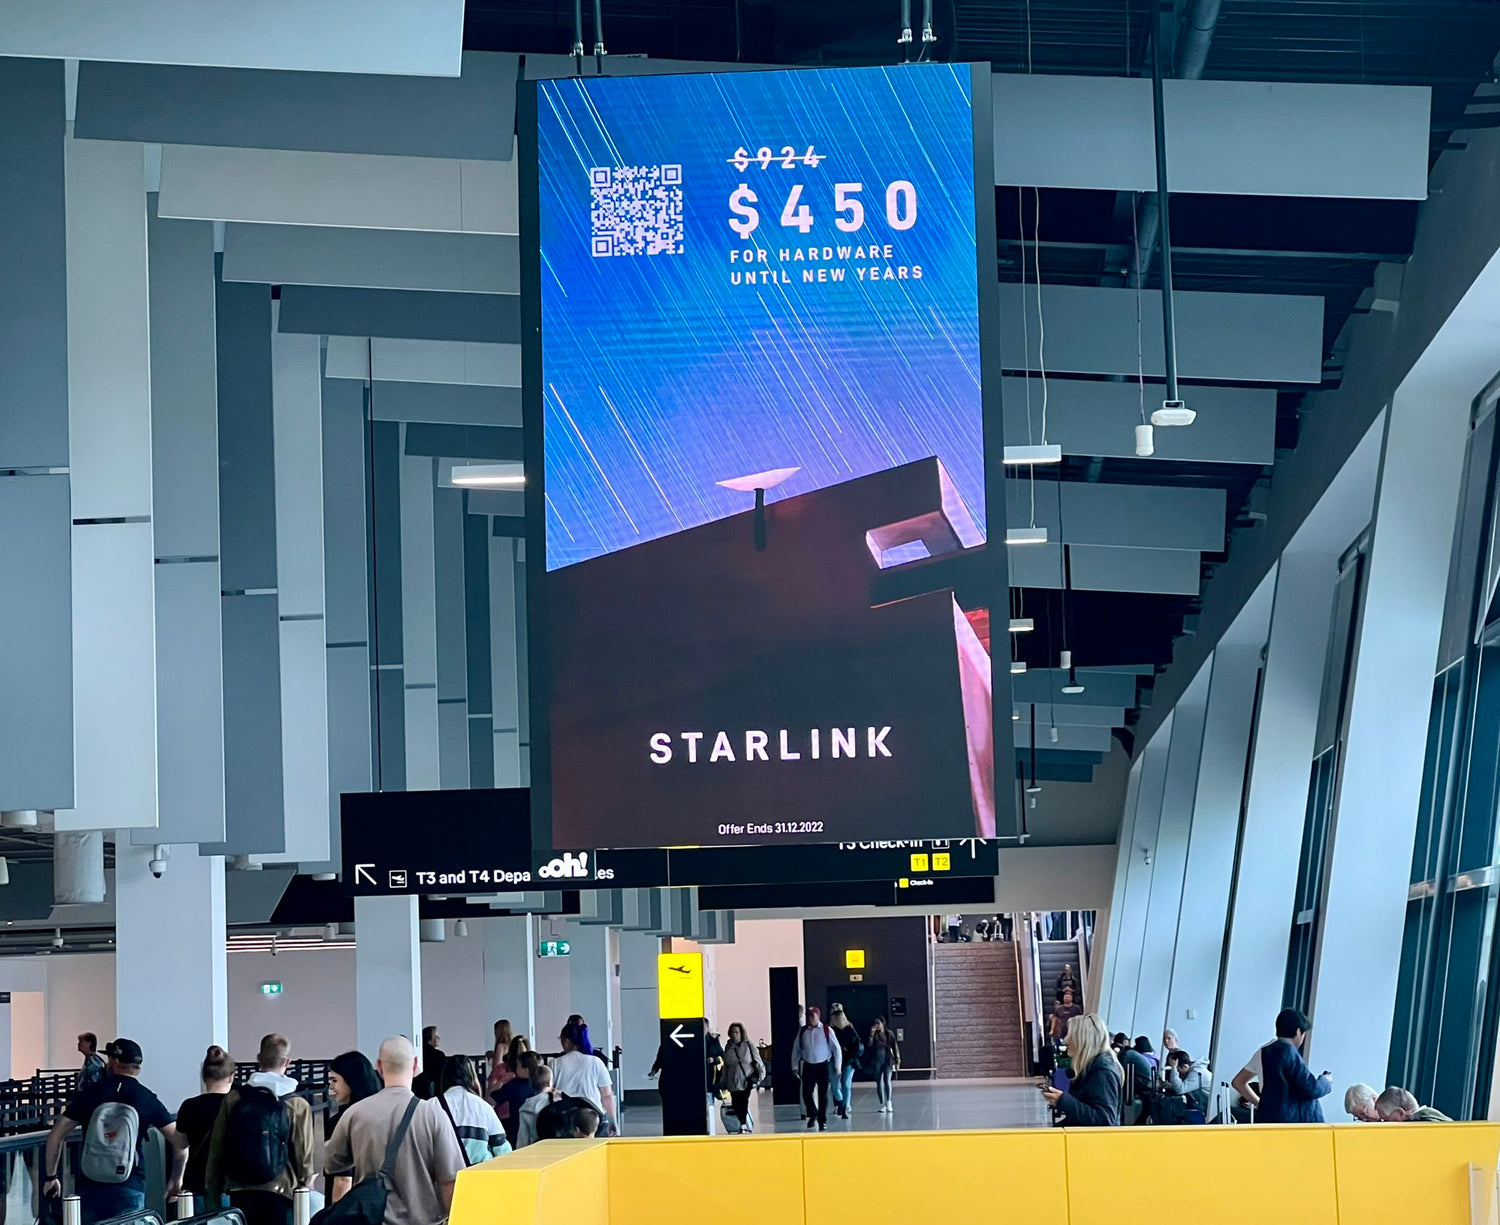 SpaceX displays Starlink discount advertisement at an Airport in Australia